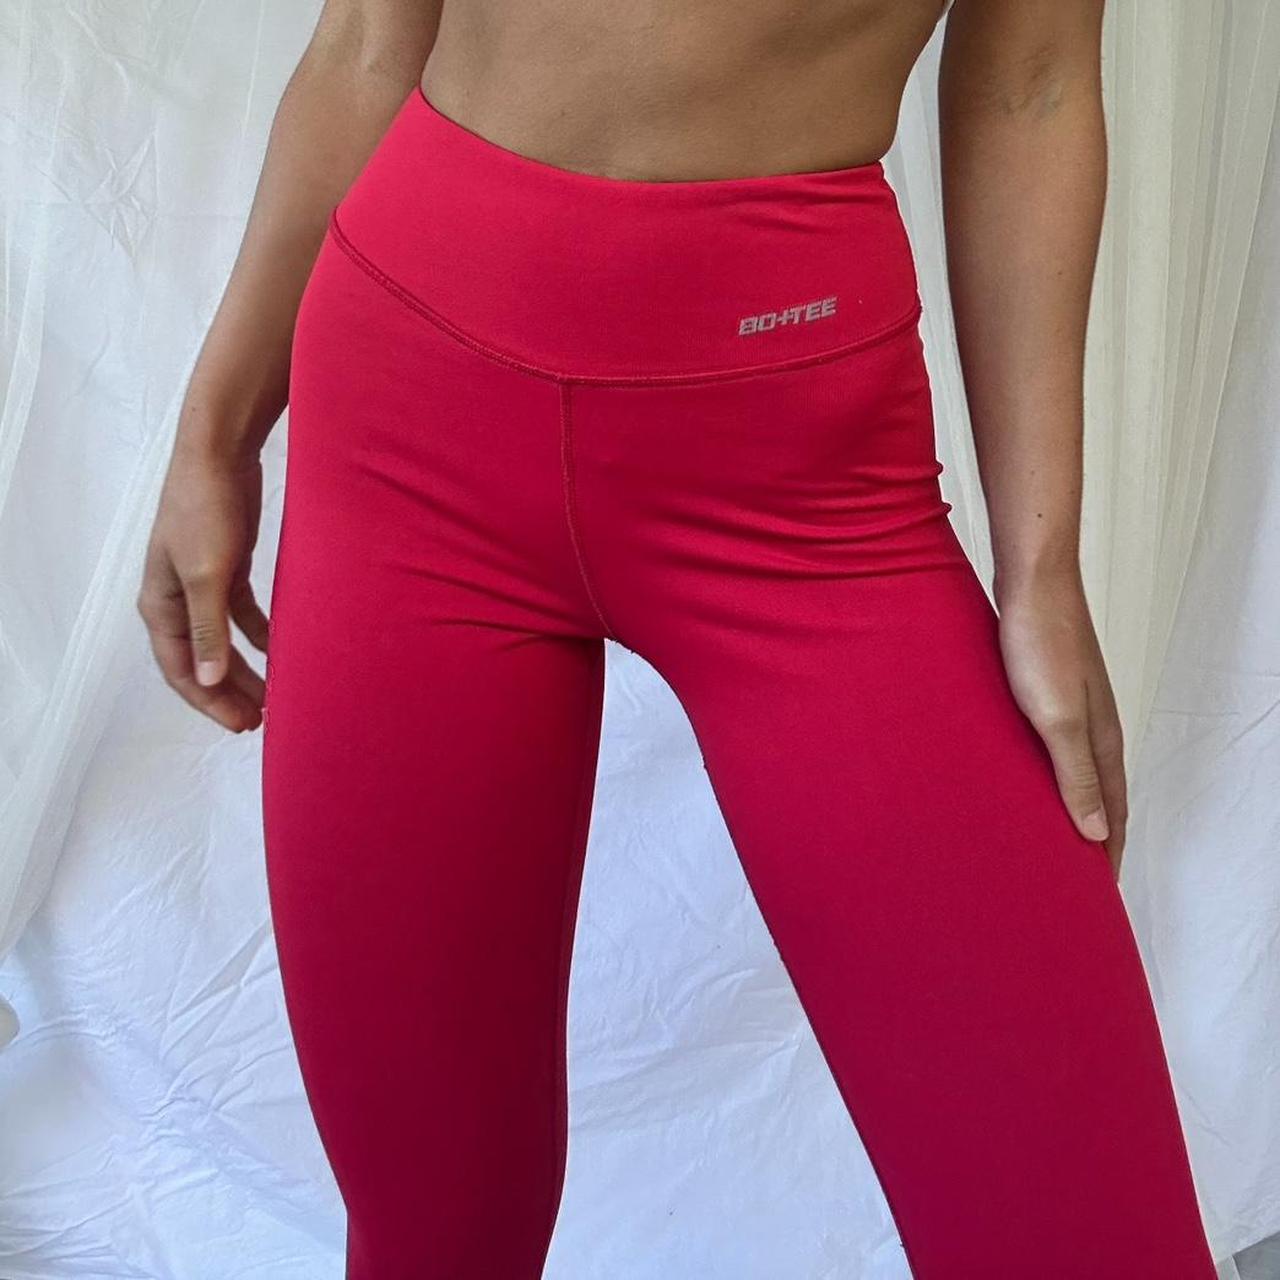 Red Bo+Tee comfy & stretchy leggings The best - Depop